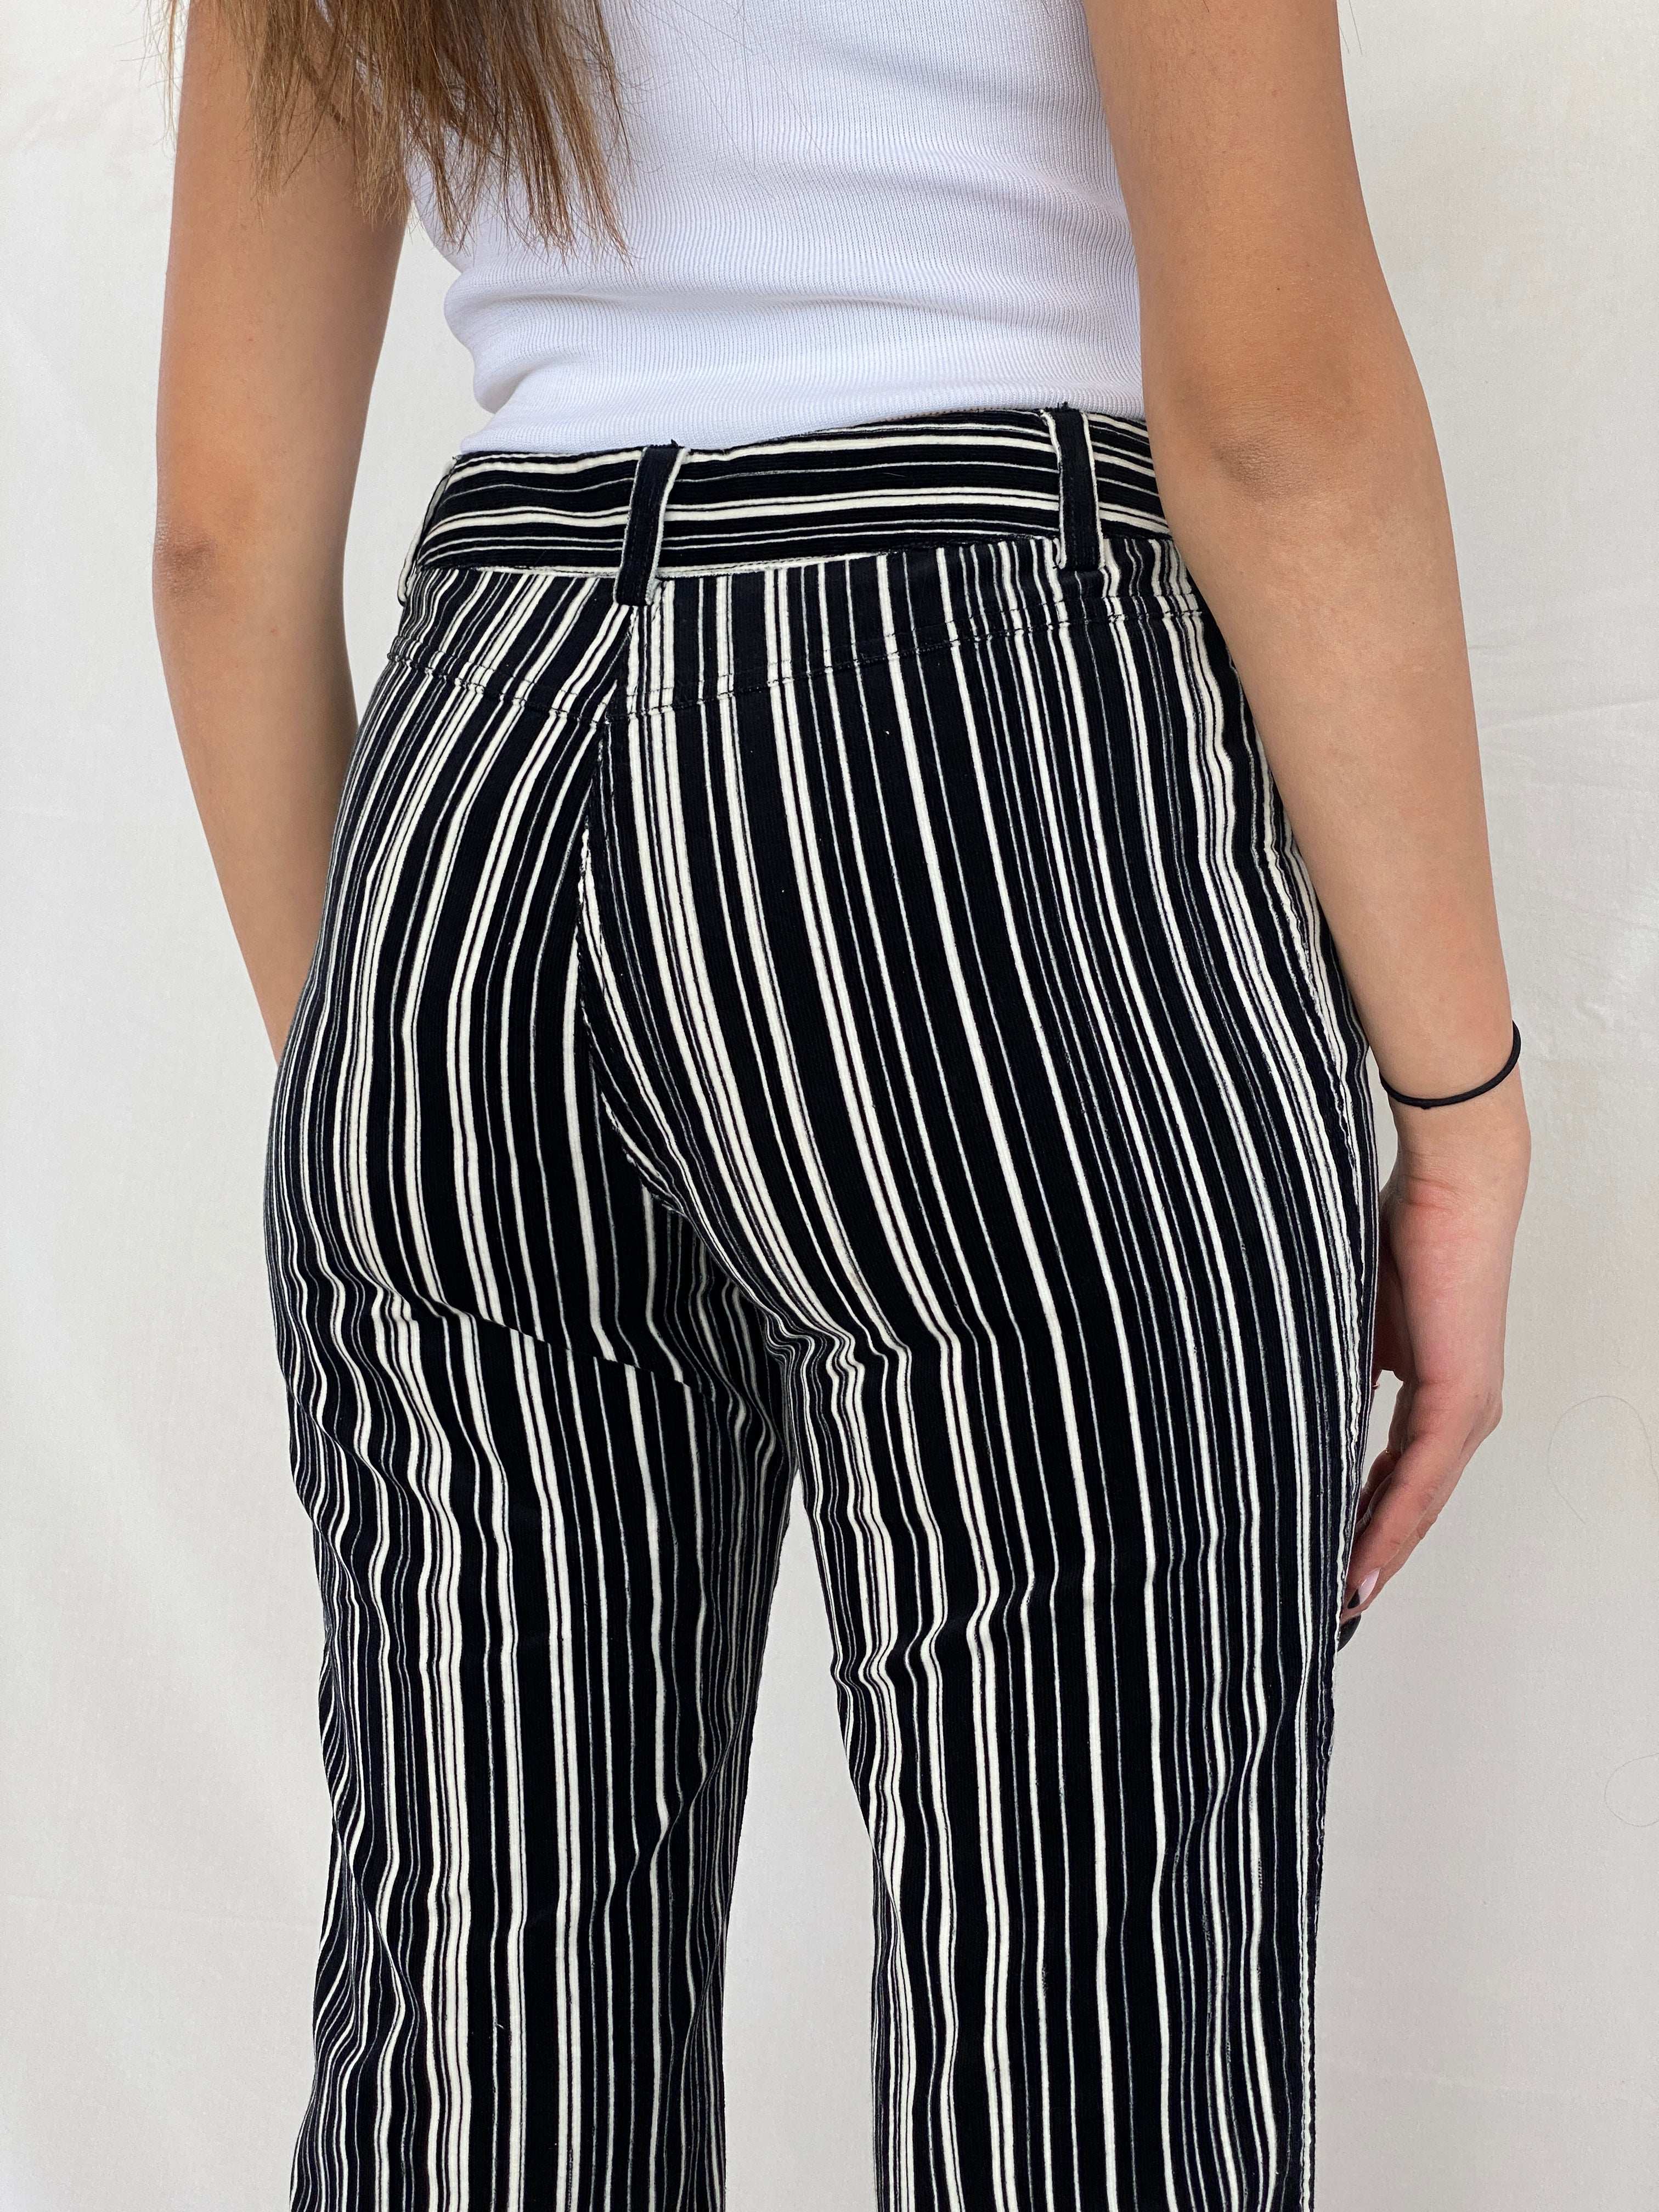 White and Blue Vertical Striped Pants Outfits For Women (41 ideas &  outfits) | Lookastic